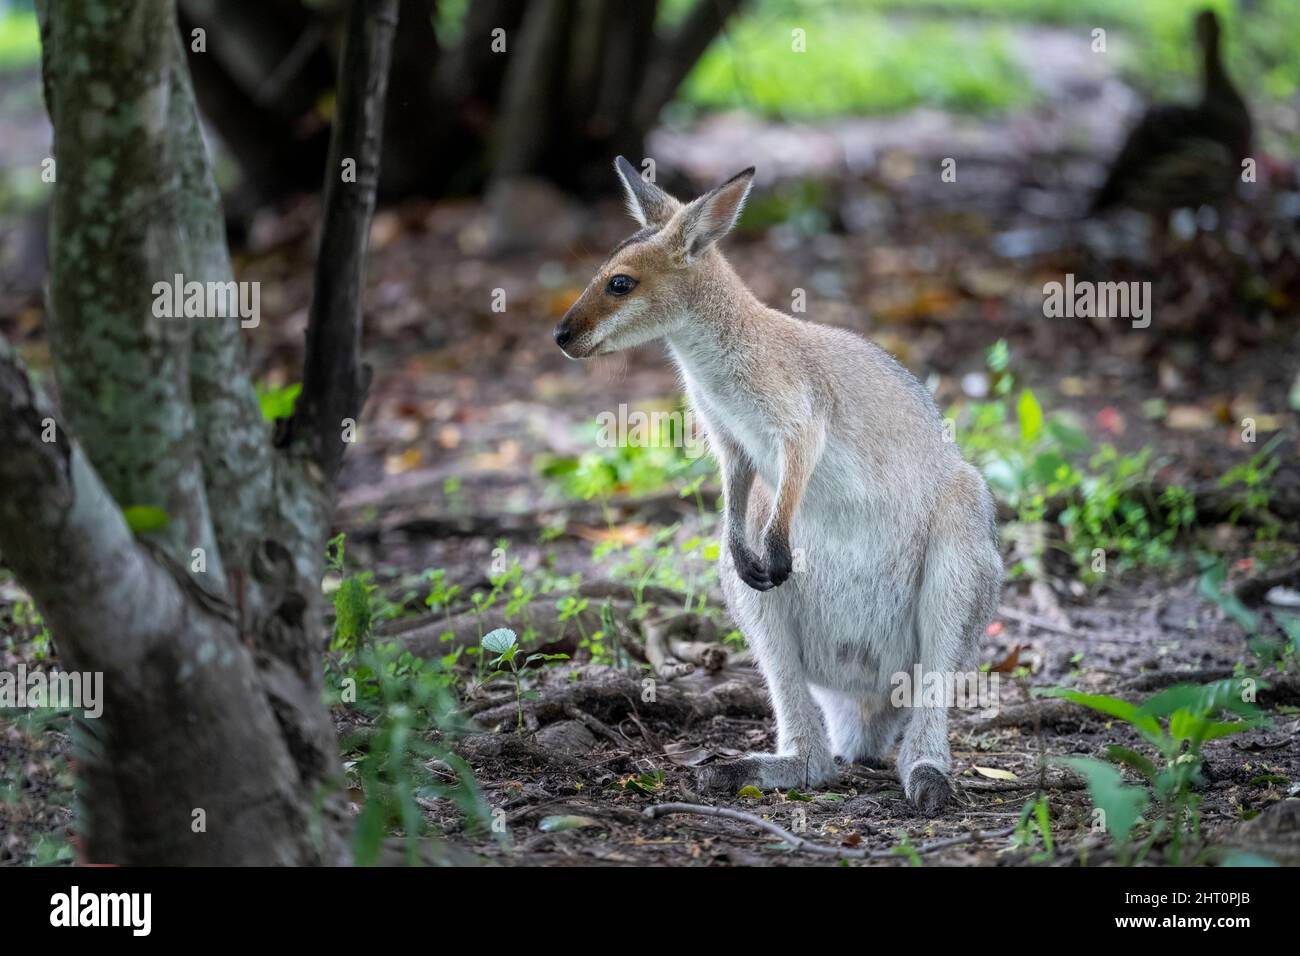 Portrait of Red-necked wallaby (Macropus rufogriseus) standing and looking at camera Stock Photo